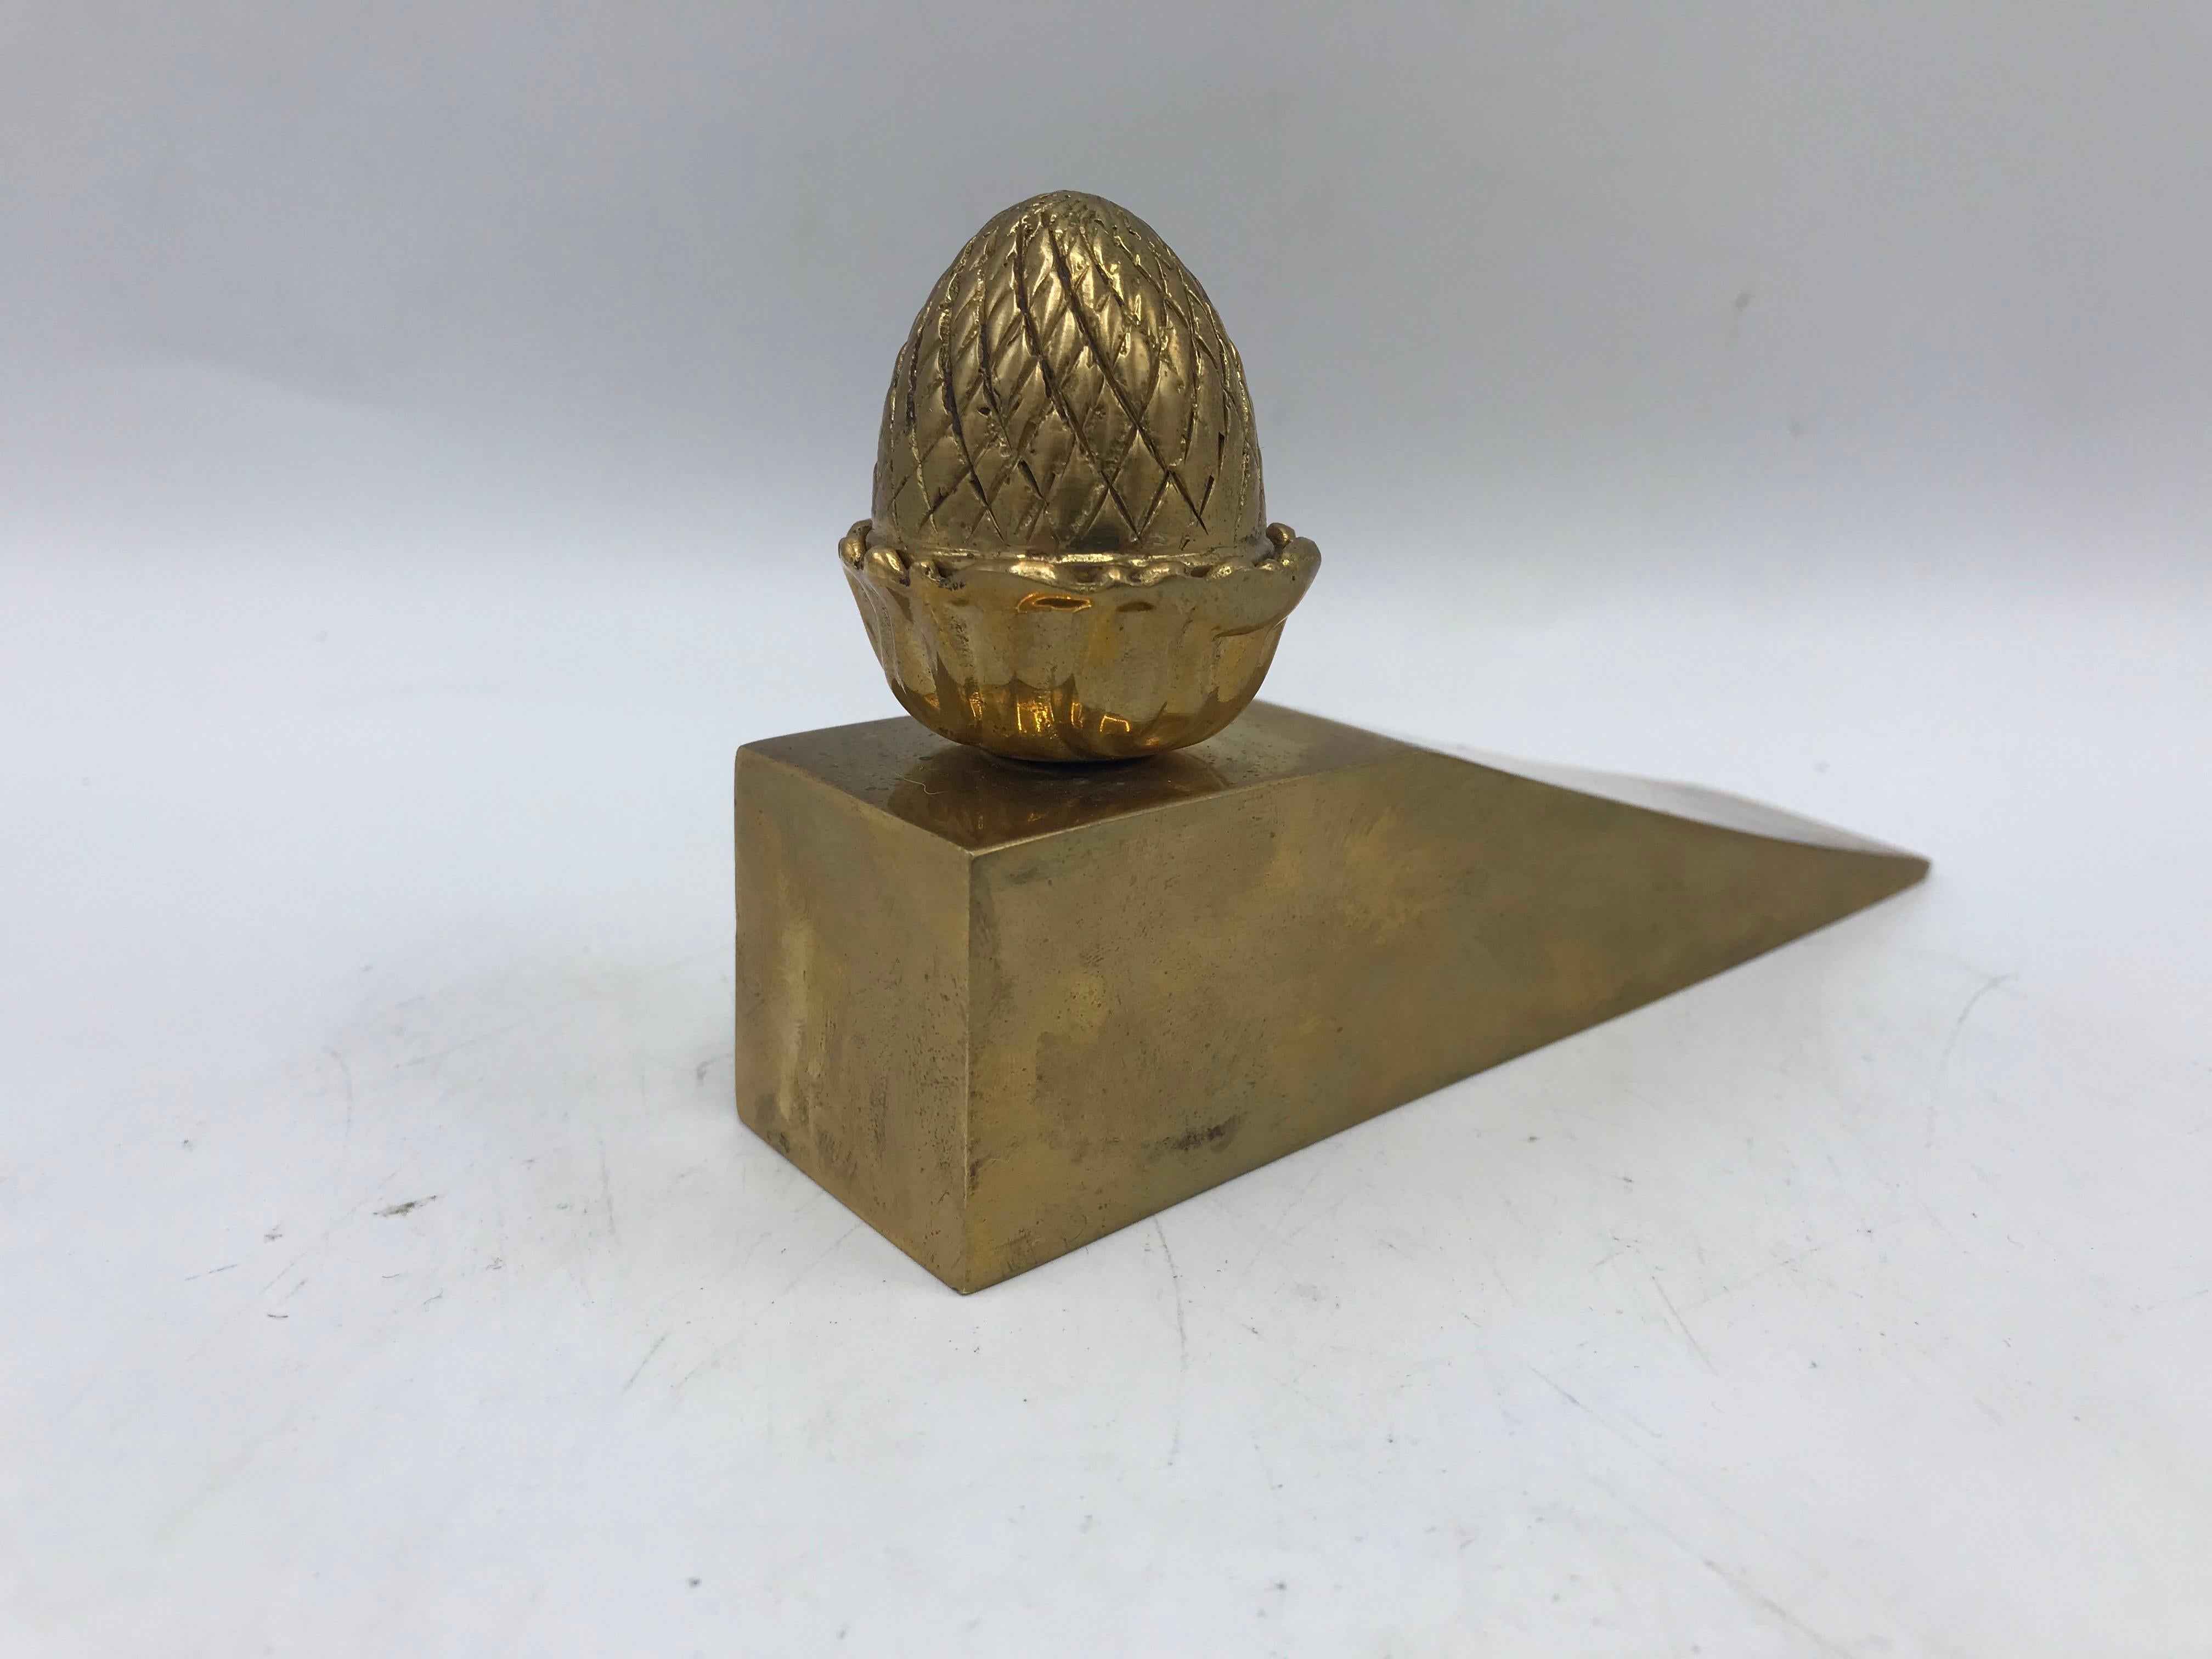 Offered is a beautiful, 1970s brass pineapple doorstop. This piece is perfect to hold open any door, welcoming guests!